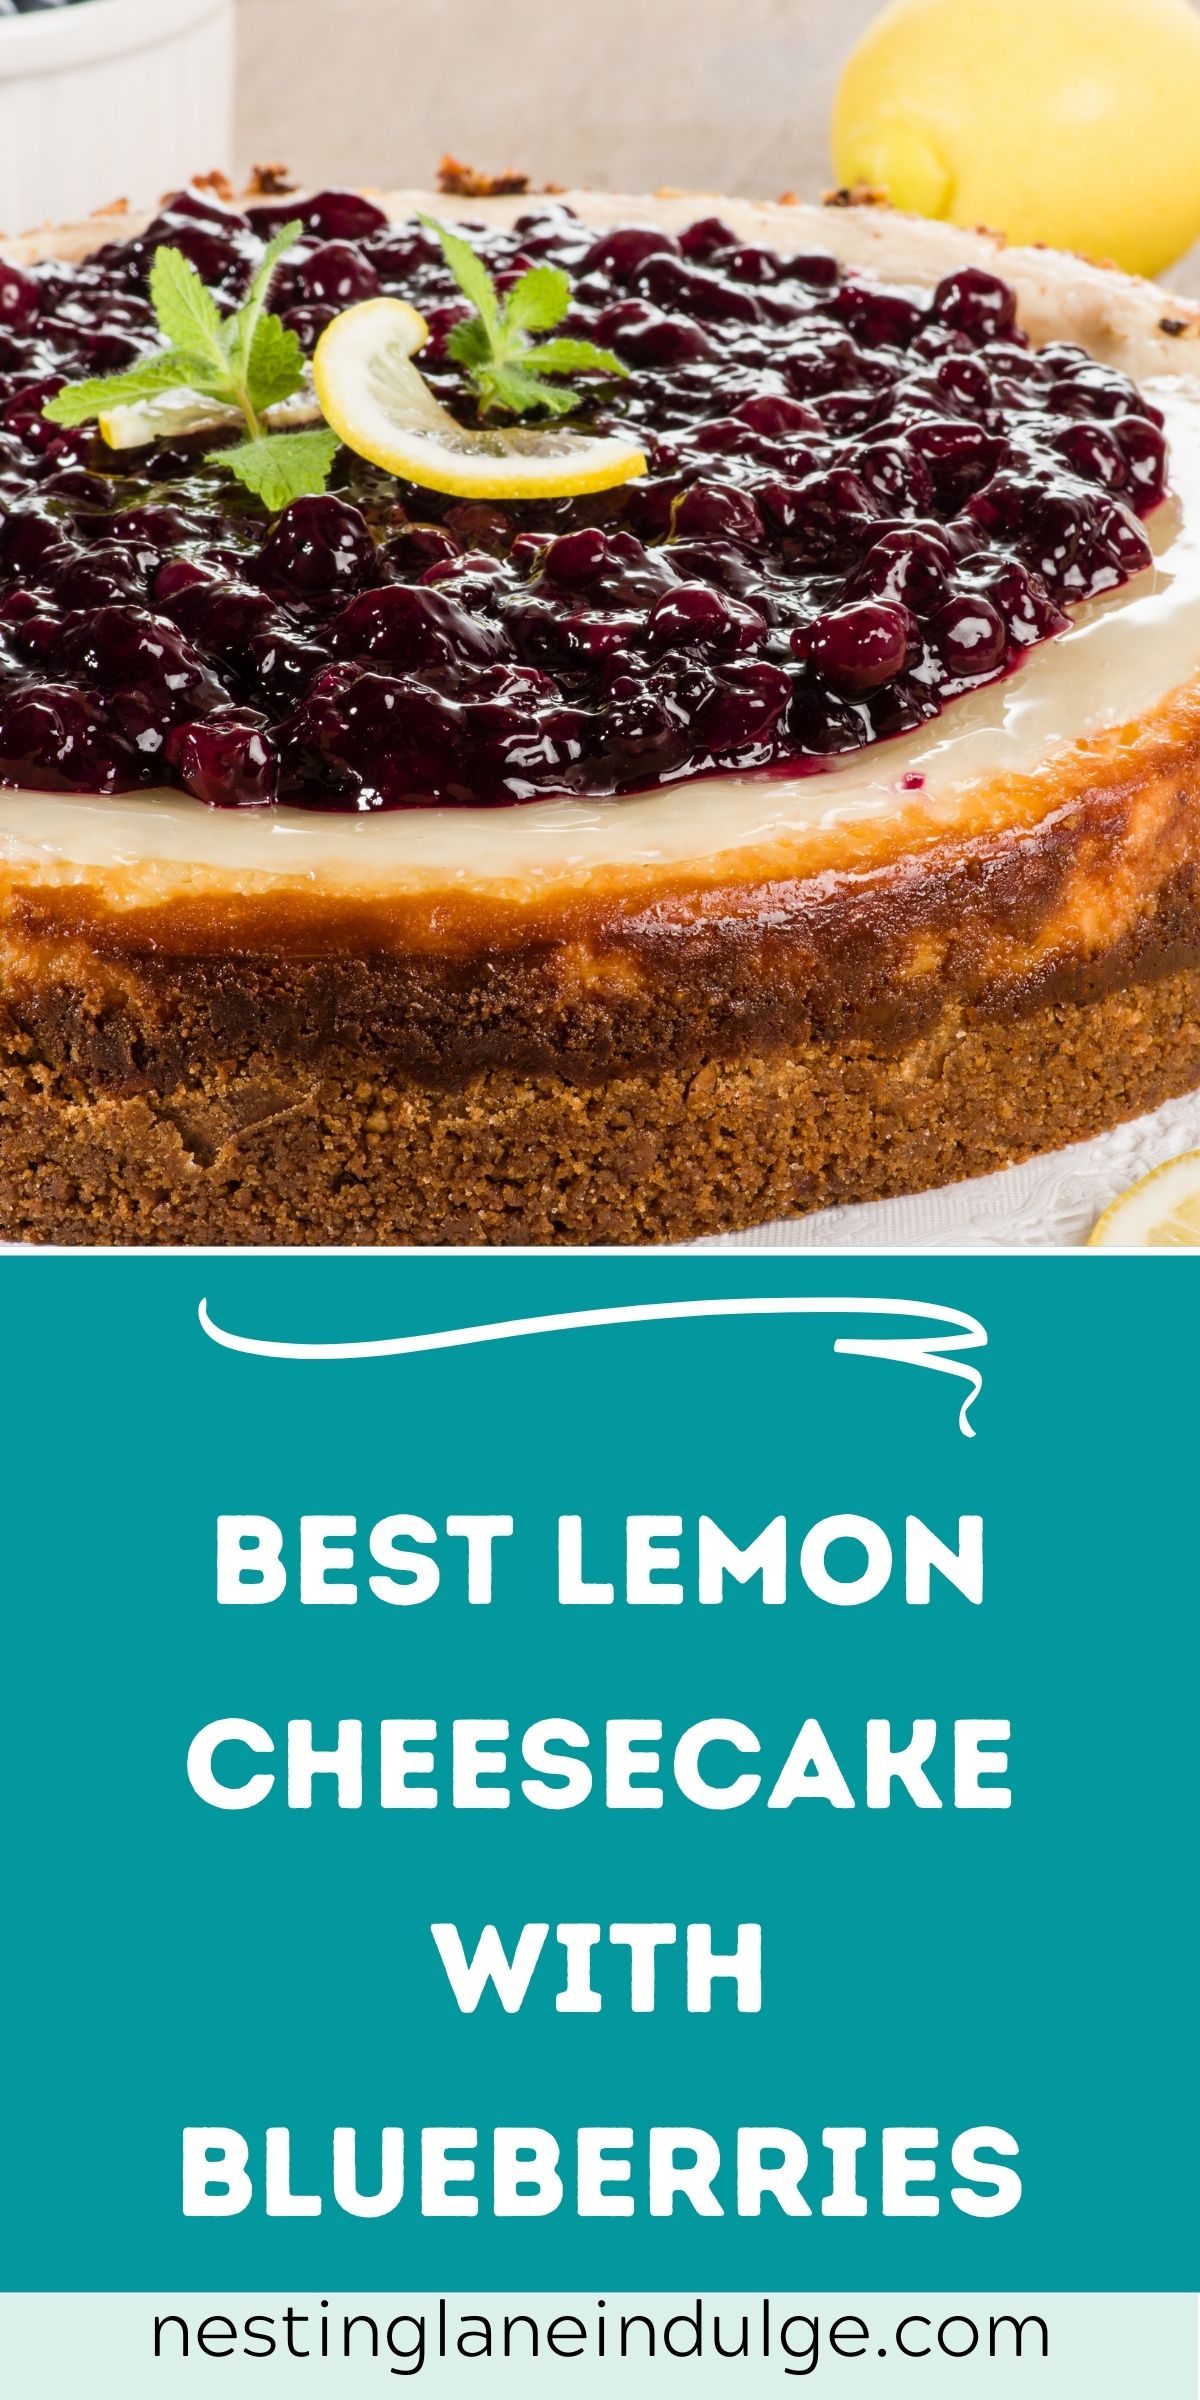 Graphic for Pinterest of Best Lemon Cheesecake with Blueberries Recipe.